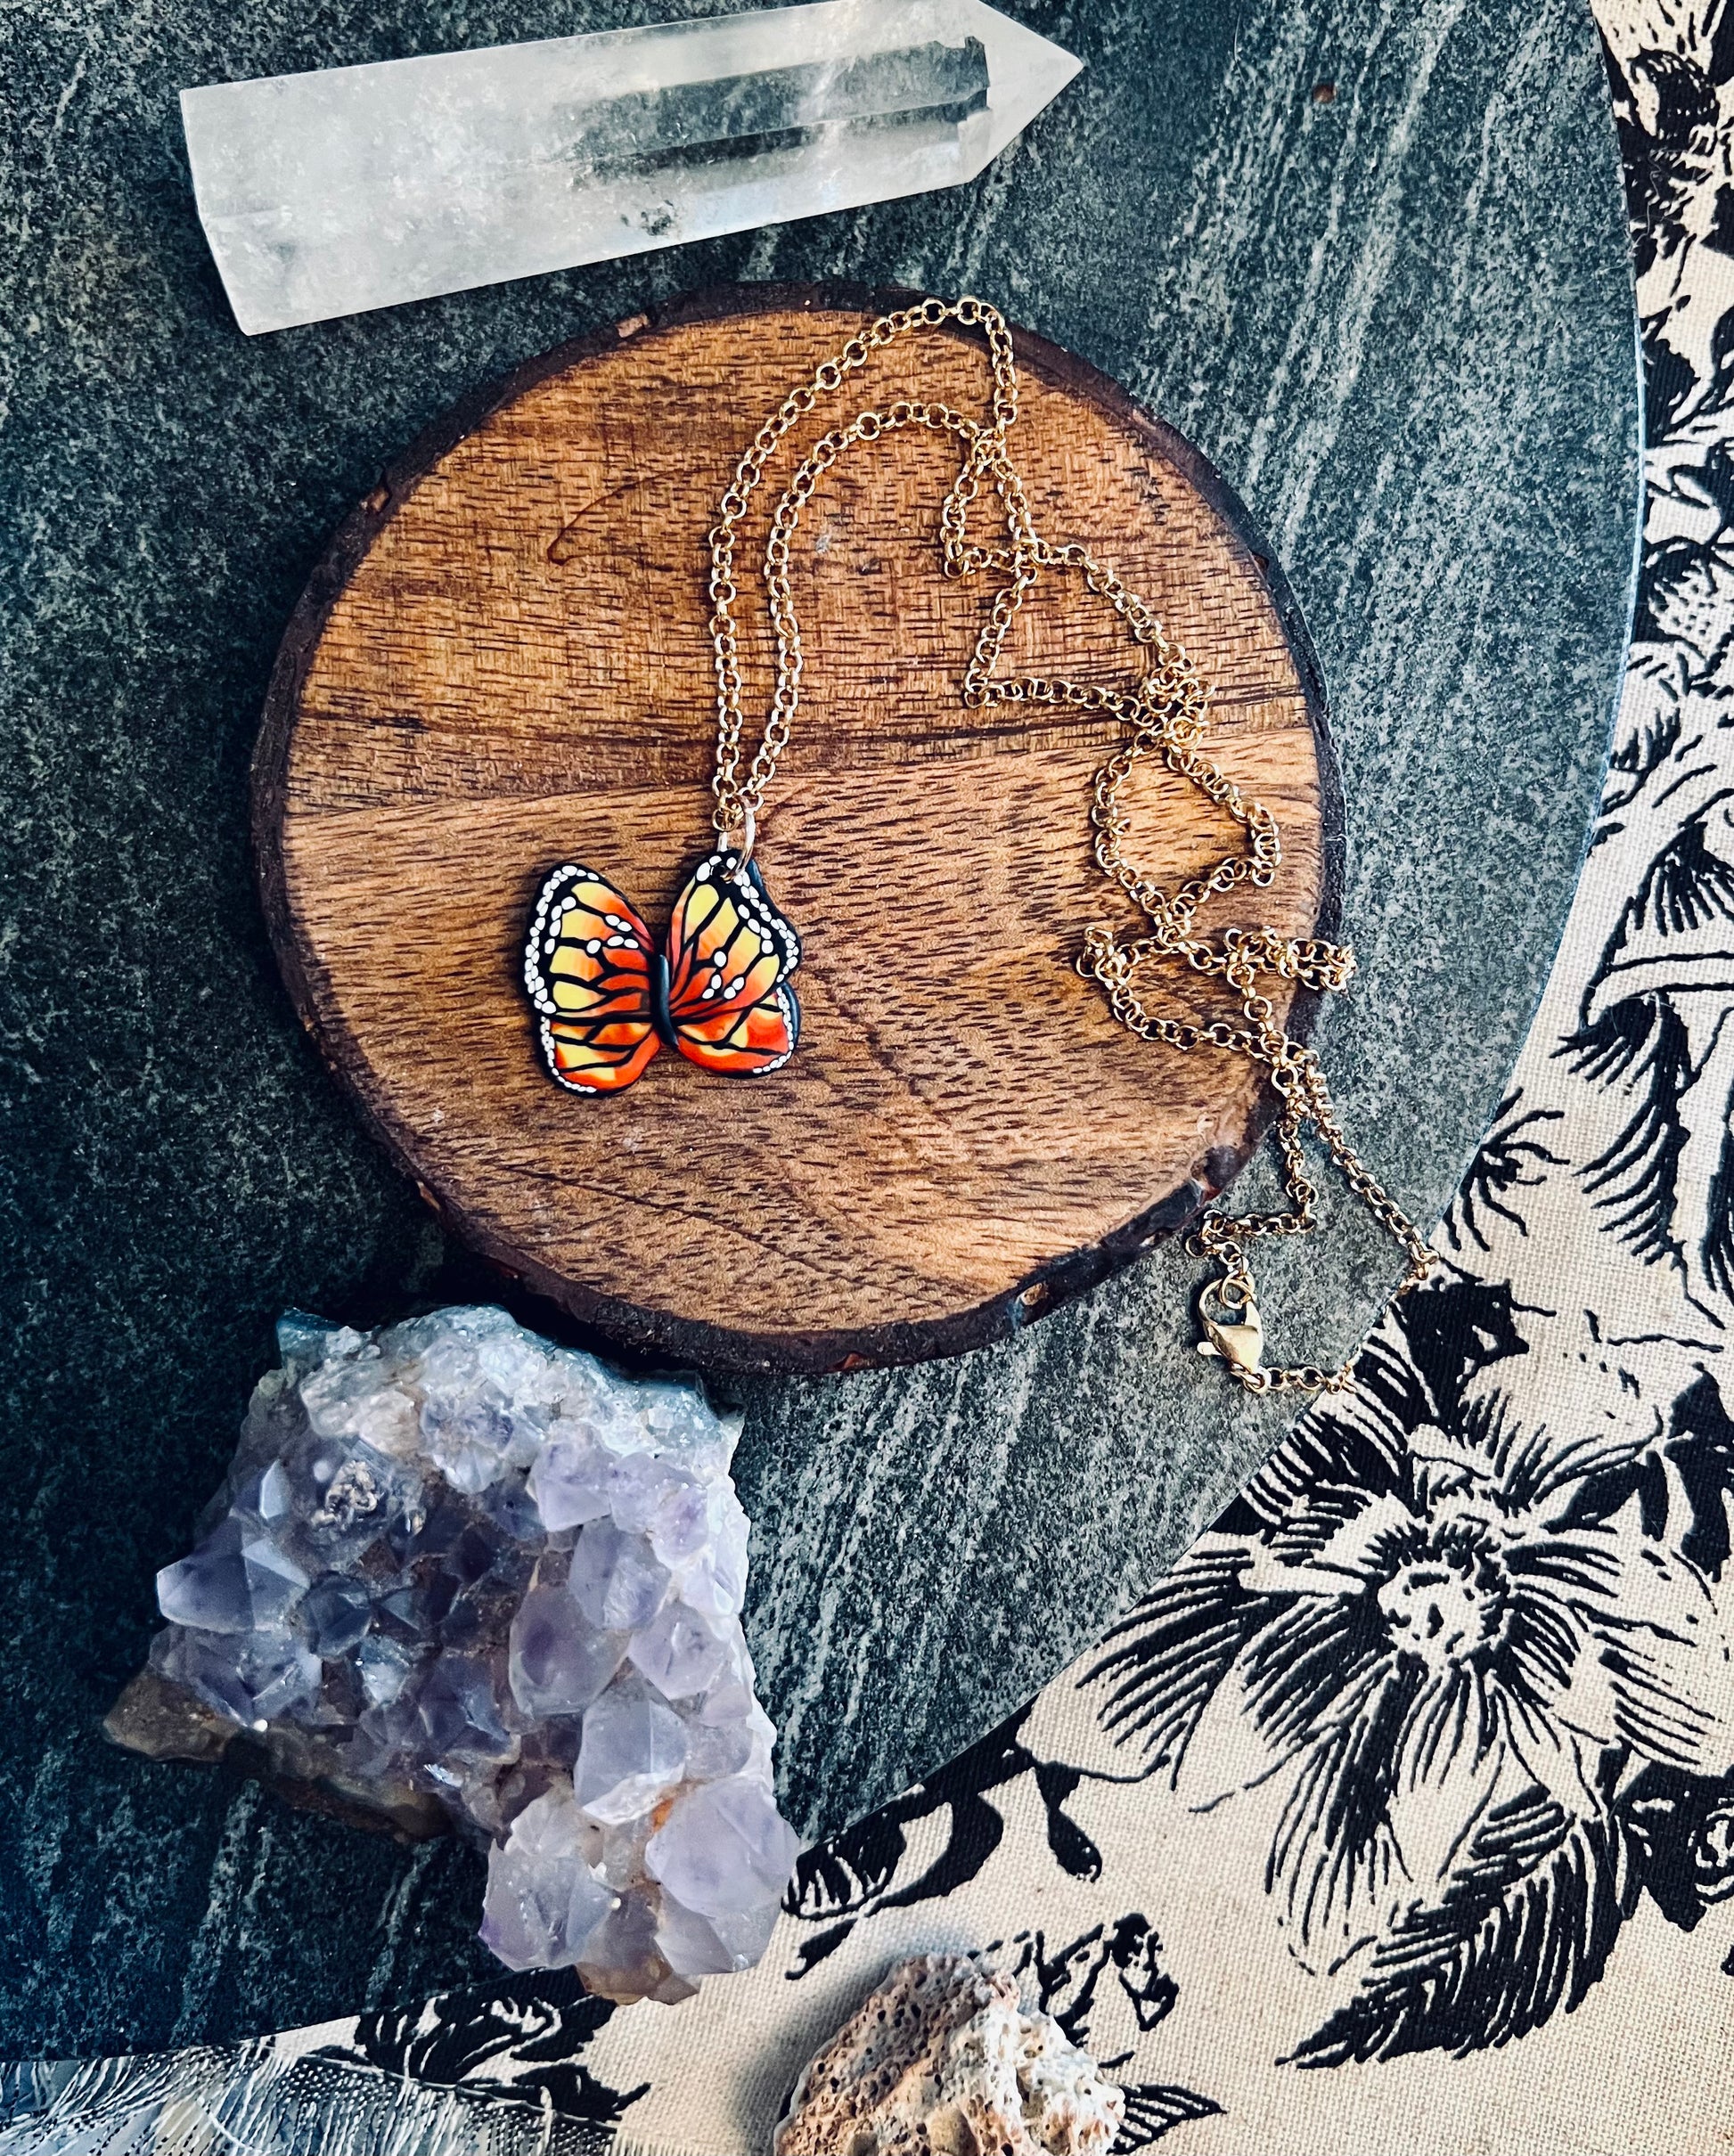 Channel the strength of the monarch butterfly with our handmade polymer clay necklace. Crafted using the Cane technique, each pair embodies the spirit of transformation and renewal